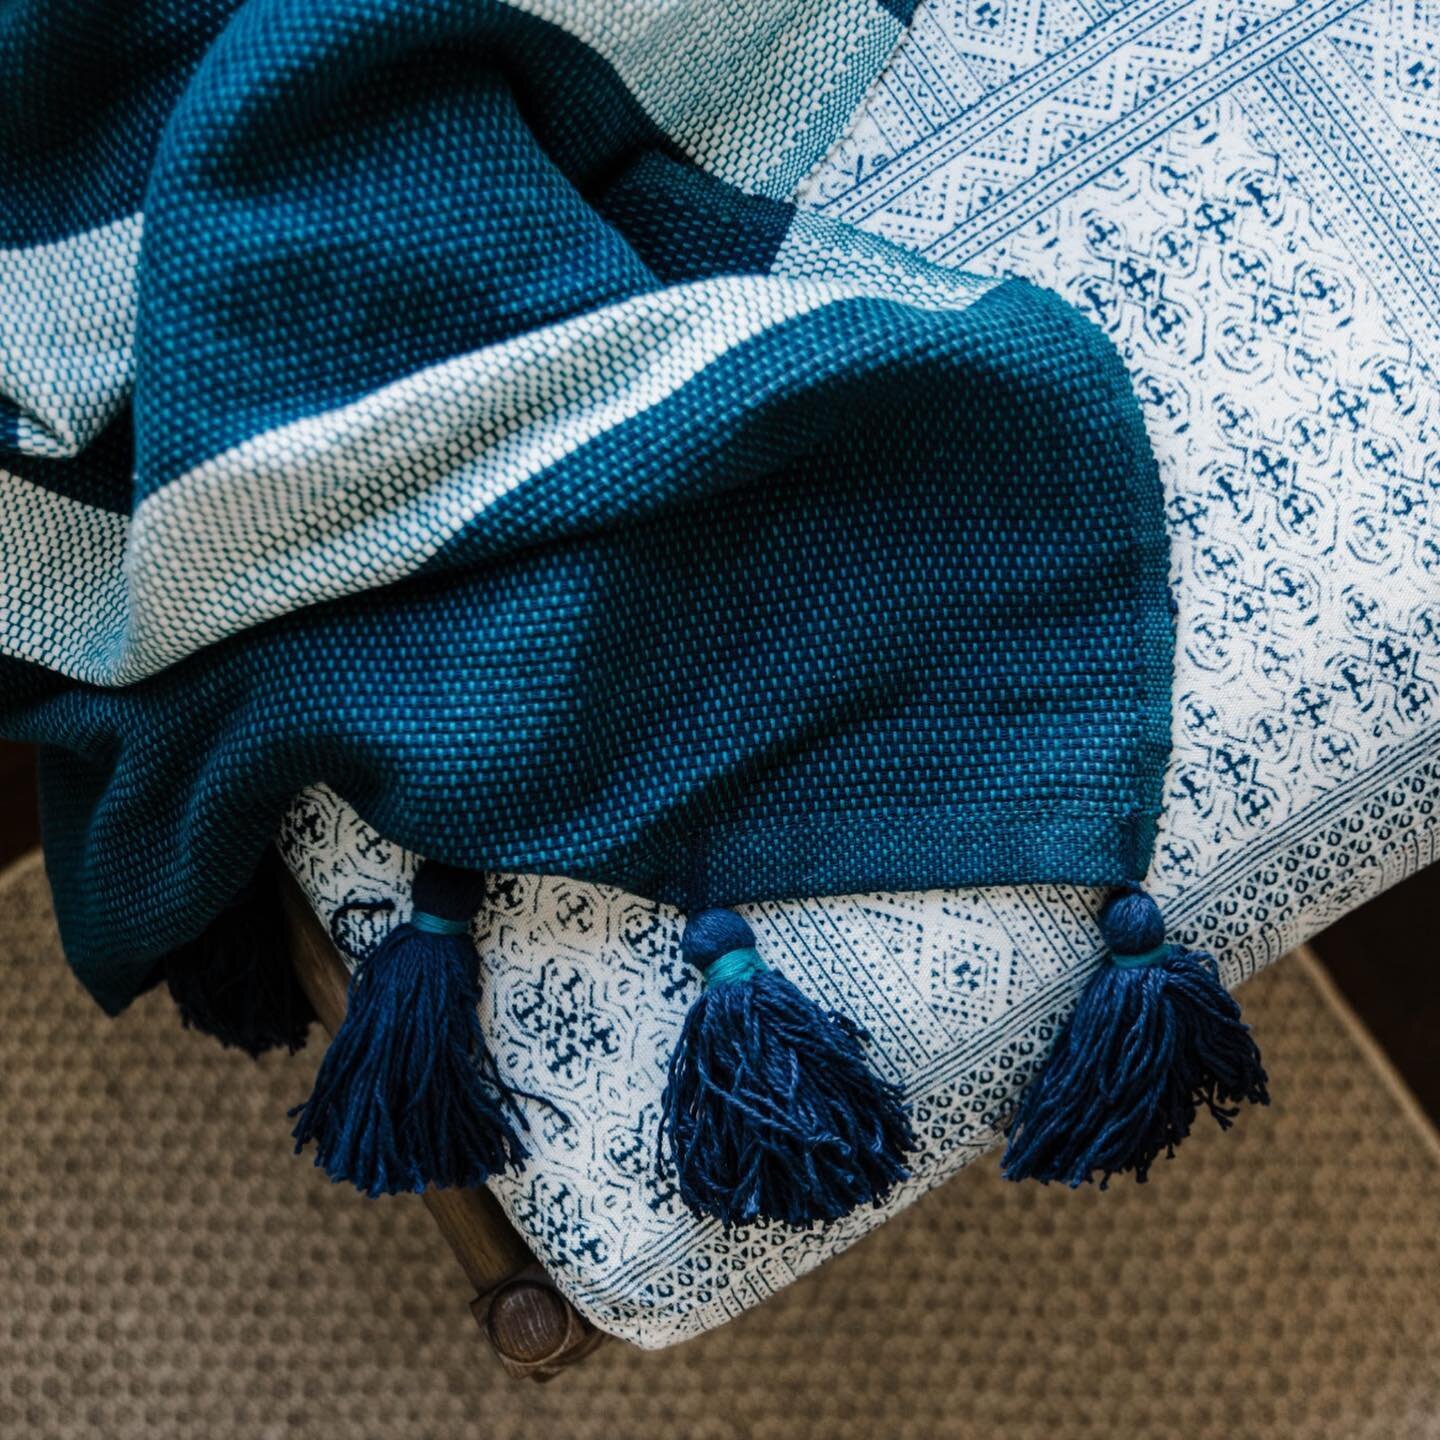 A space is a sum of all of its parts. Subtle or bold, thinking about each texture, pattern and colorway allows us to create the perfect nest for our clients.

📷 @brenna_lynnn 
.
.
.
#blue #interiordesign #textures #decor #cushions #fridayfeeling